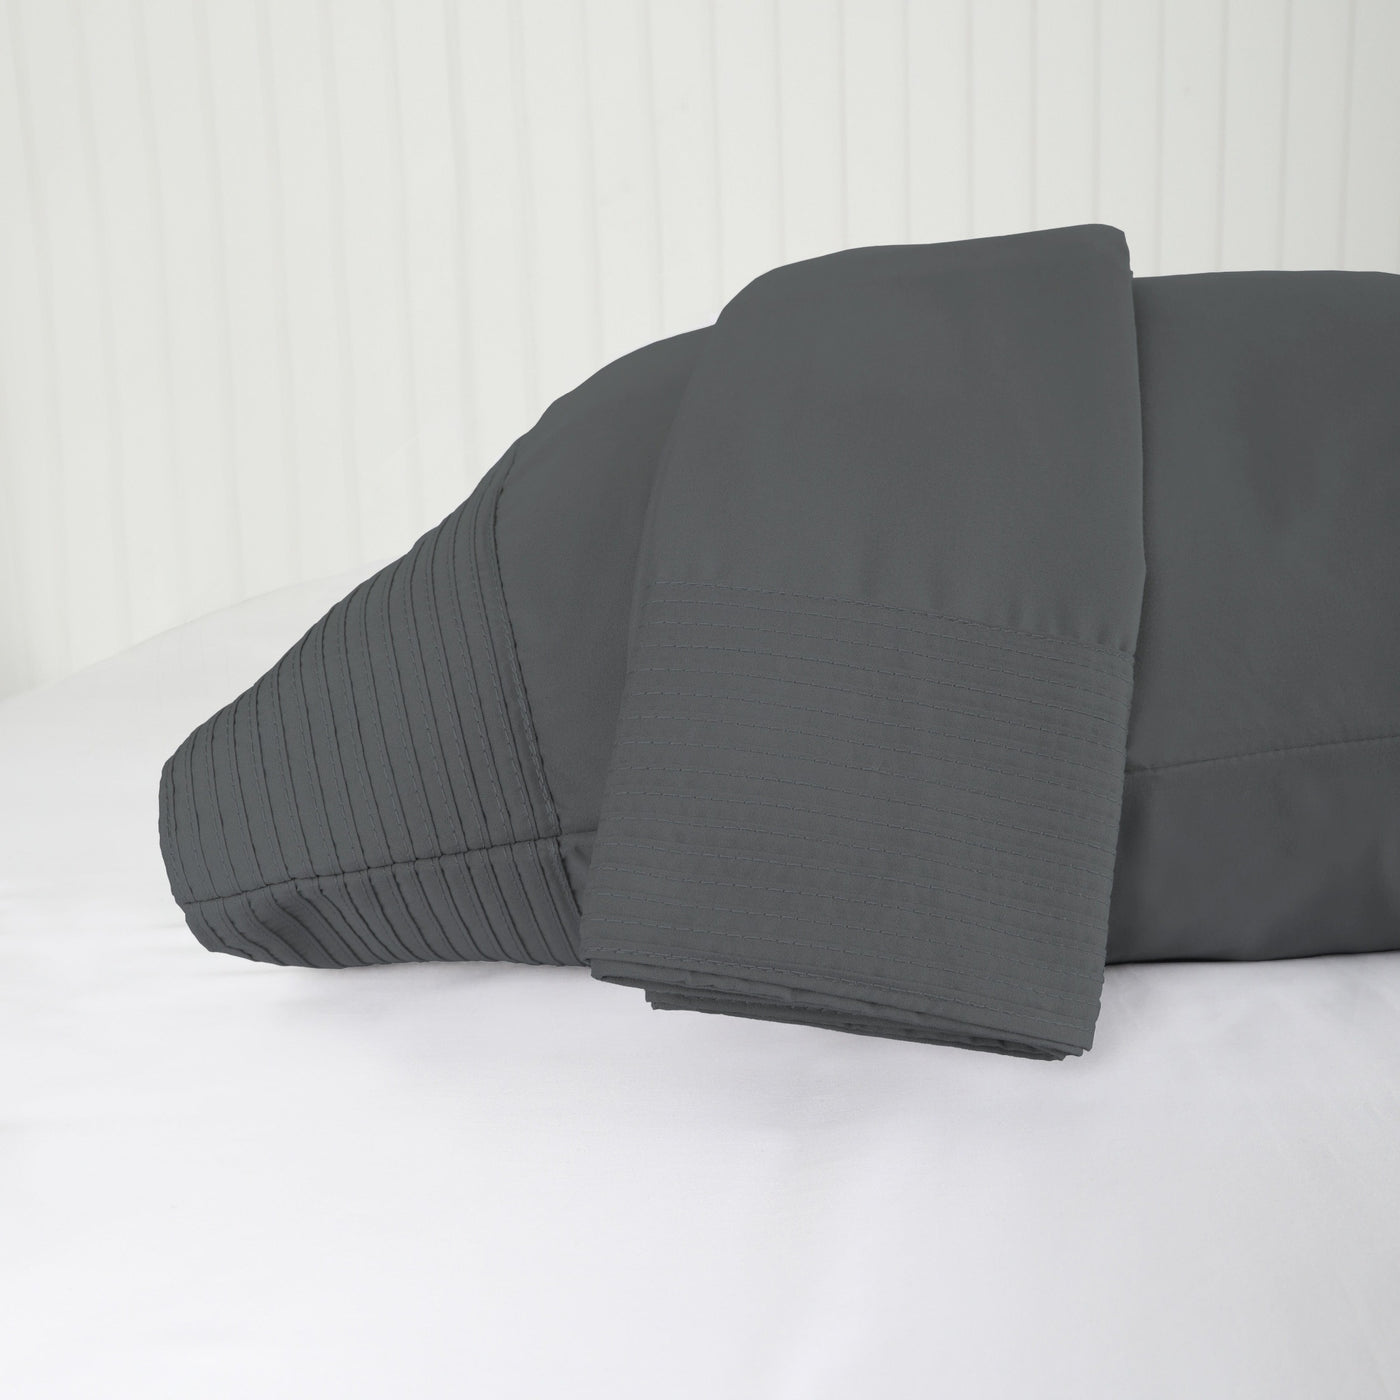 Details and Texture of Vilano Pleated Pillow Cases in Slate#color_vilano-slate